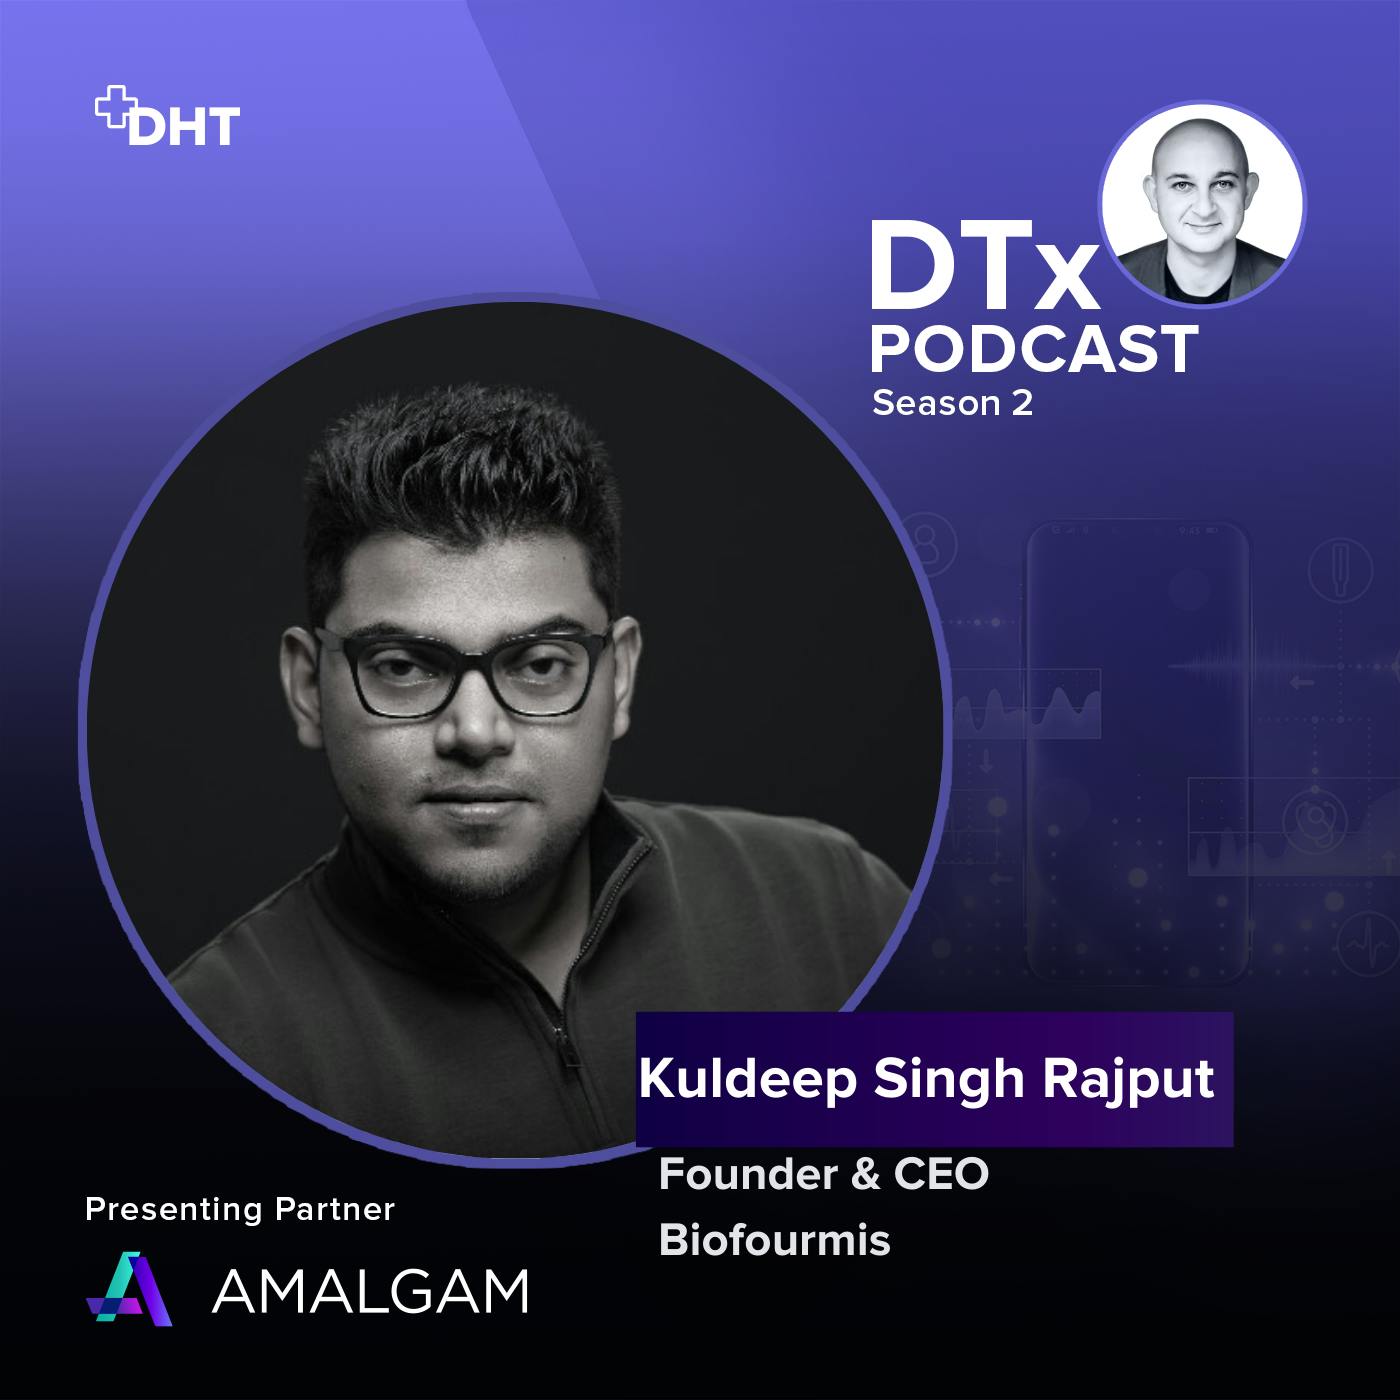 Data Driven Healthcare Services: Kuldeep Singh Rajput Shares Insights on Evolving DTx into Virtual Care Platforms